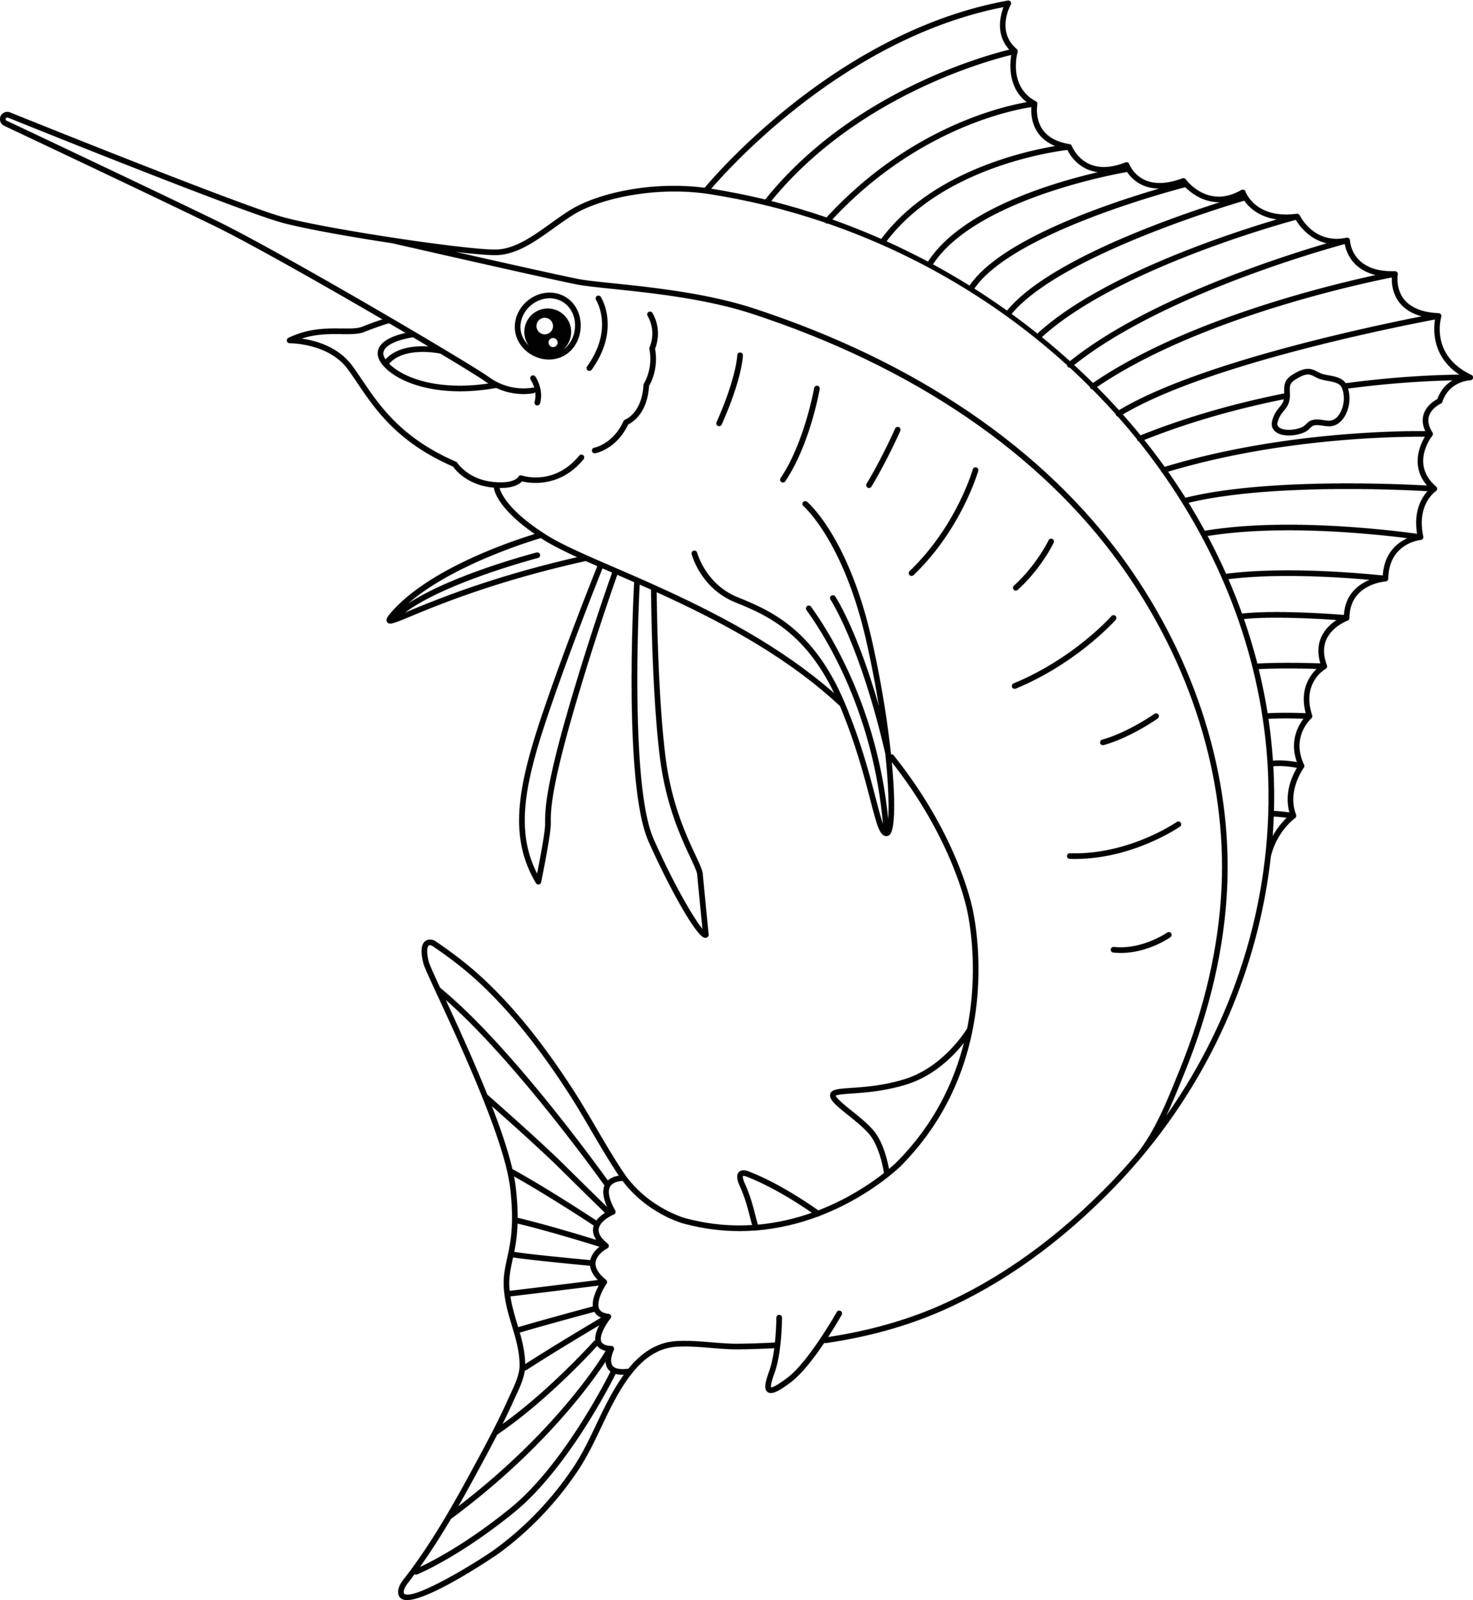 Sailfish Coloring Page Isolated for Kids by abbydesign